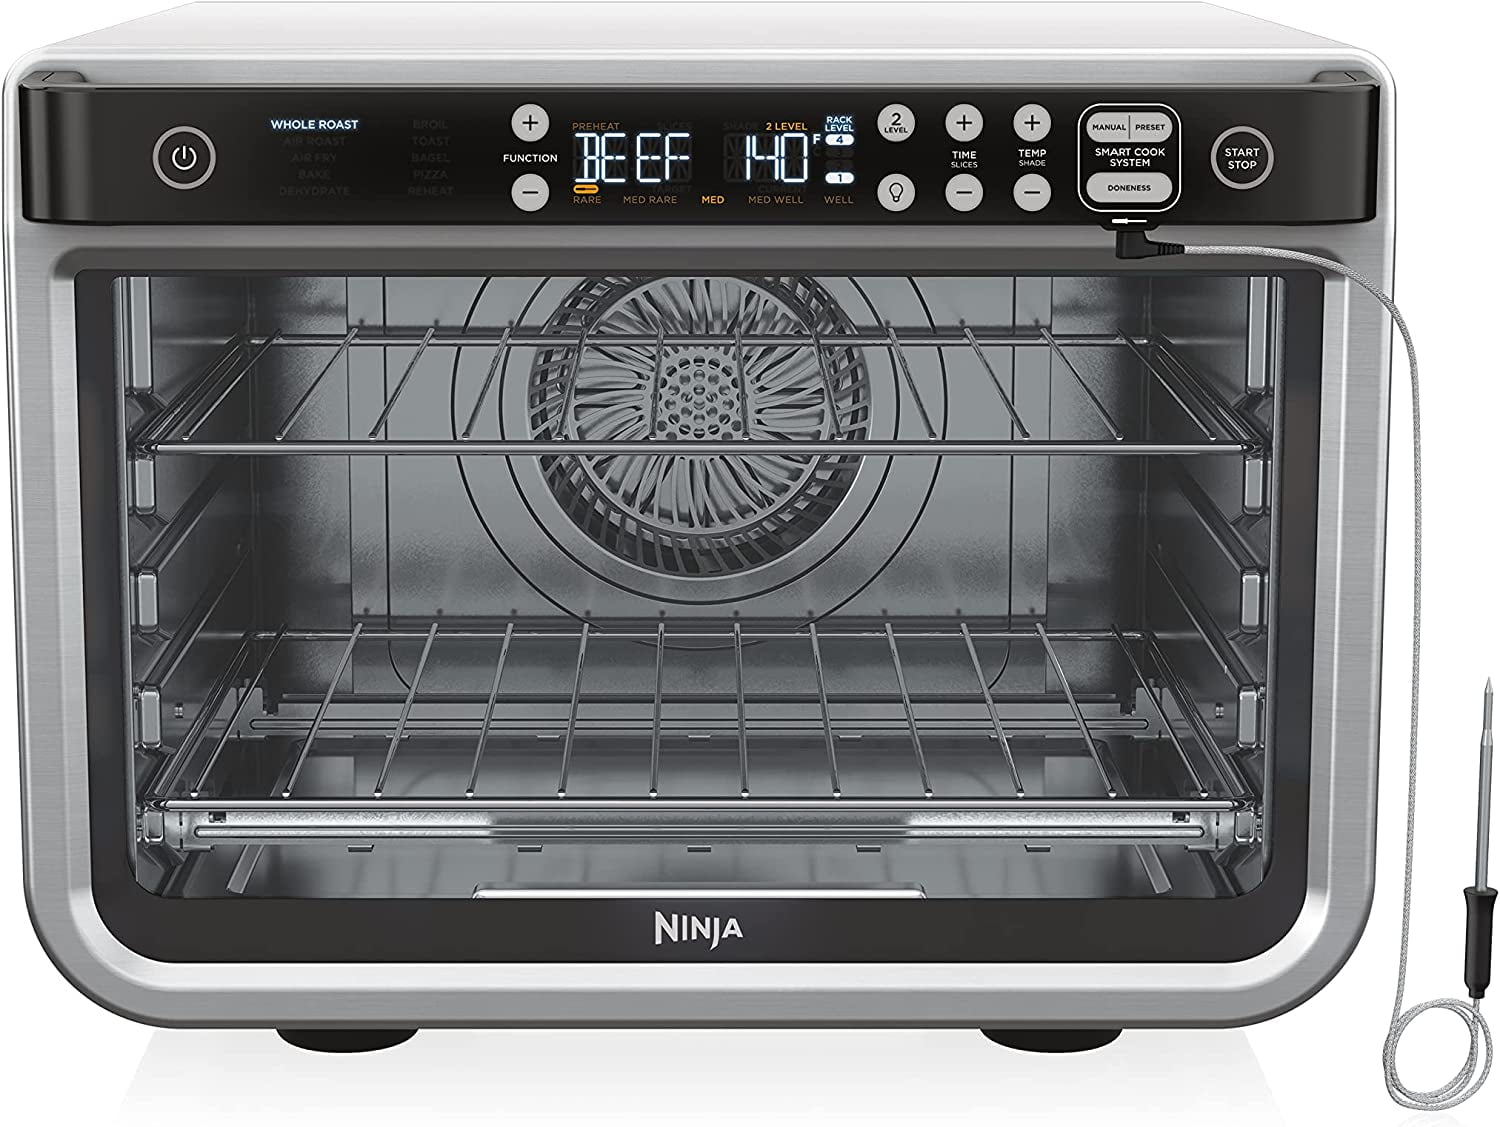 Panasonic Air Fry True Convection Steam Toaster Oven Review 